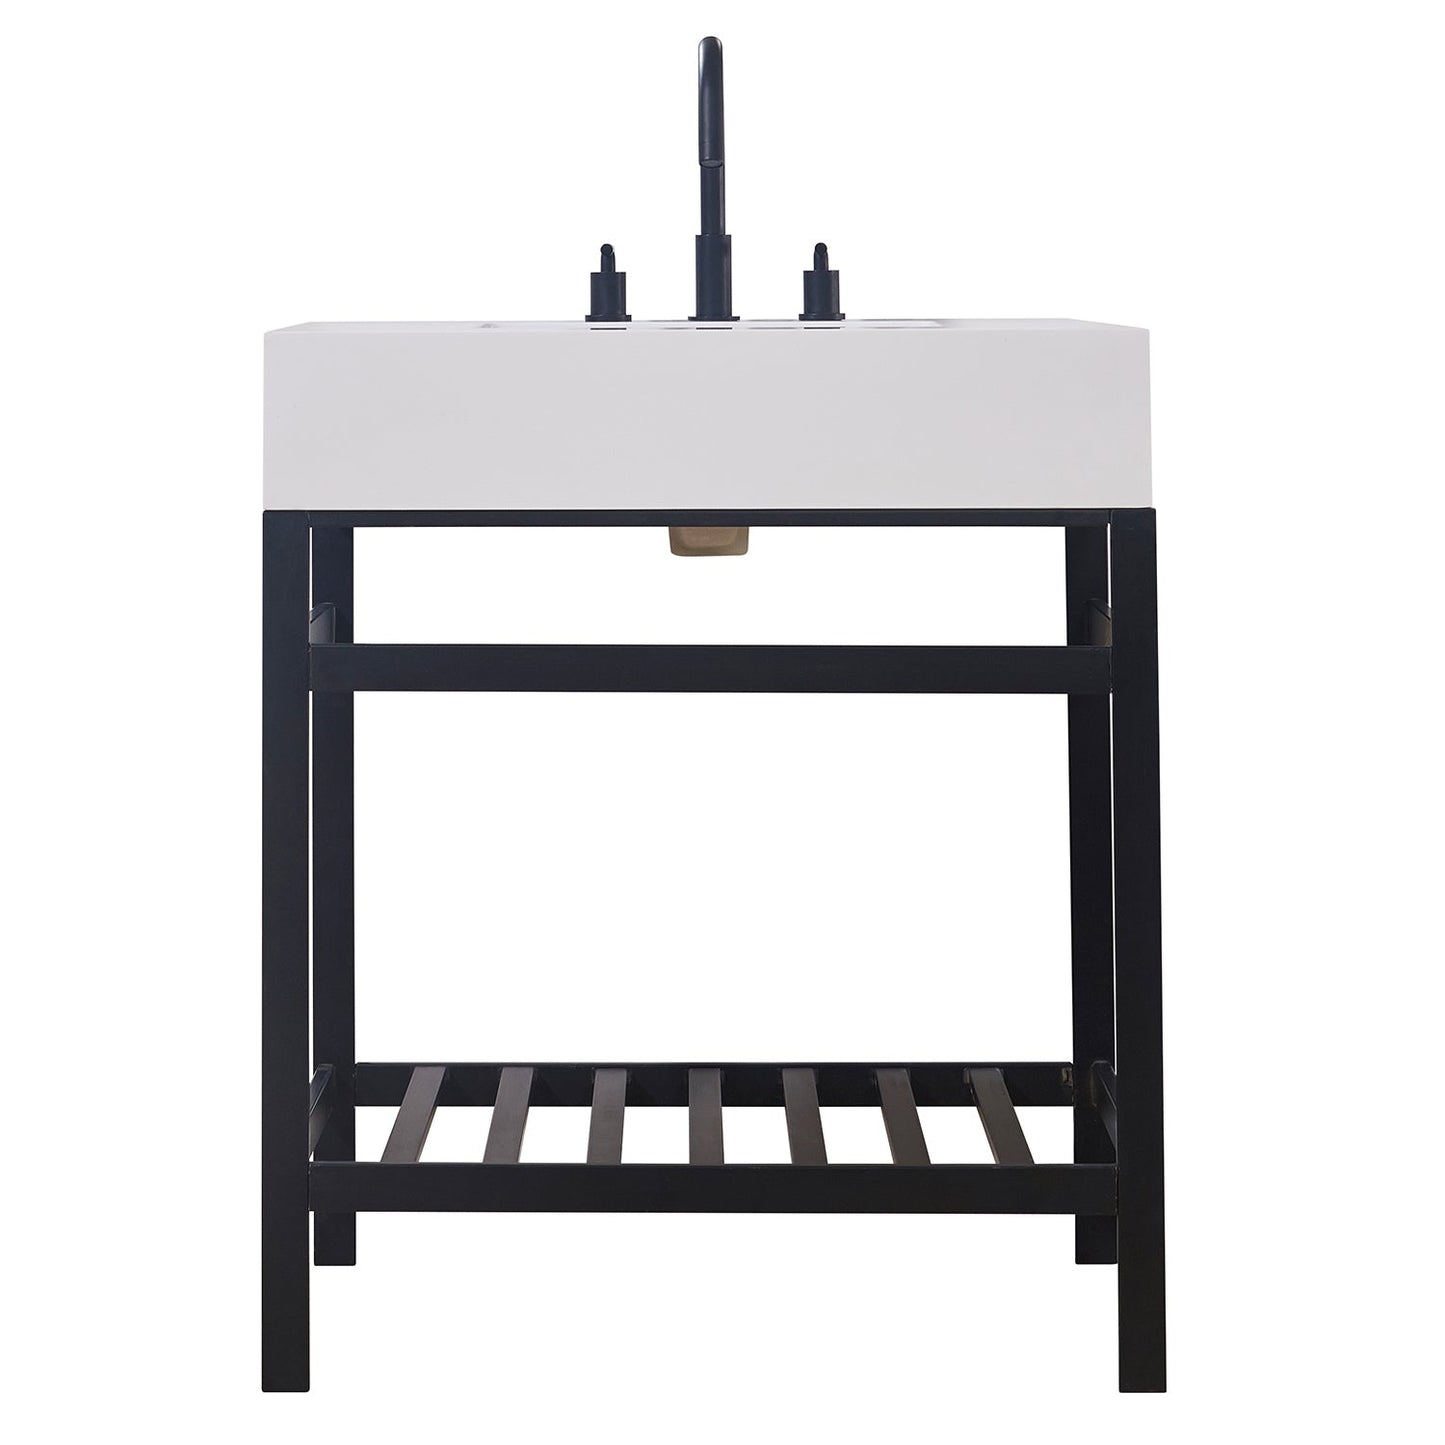 Edolo 30" Single Stainless Steel Vanity Console in Matt Black with Snow White Stone Countertop without Mirror